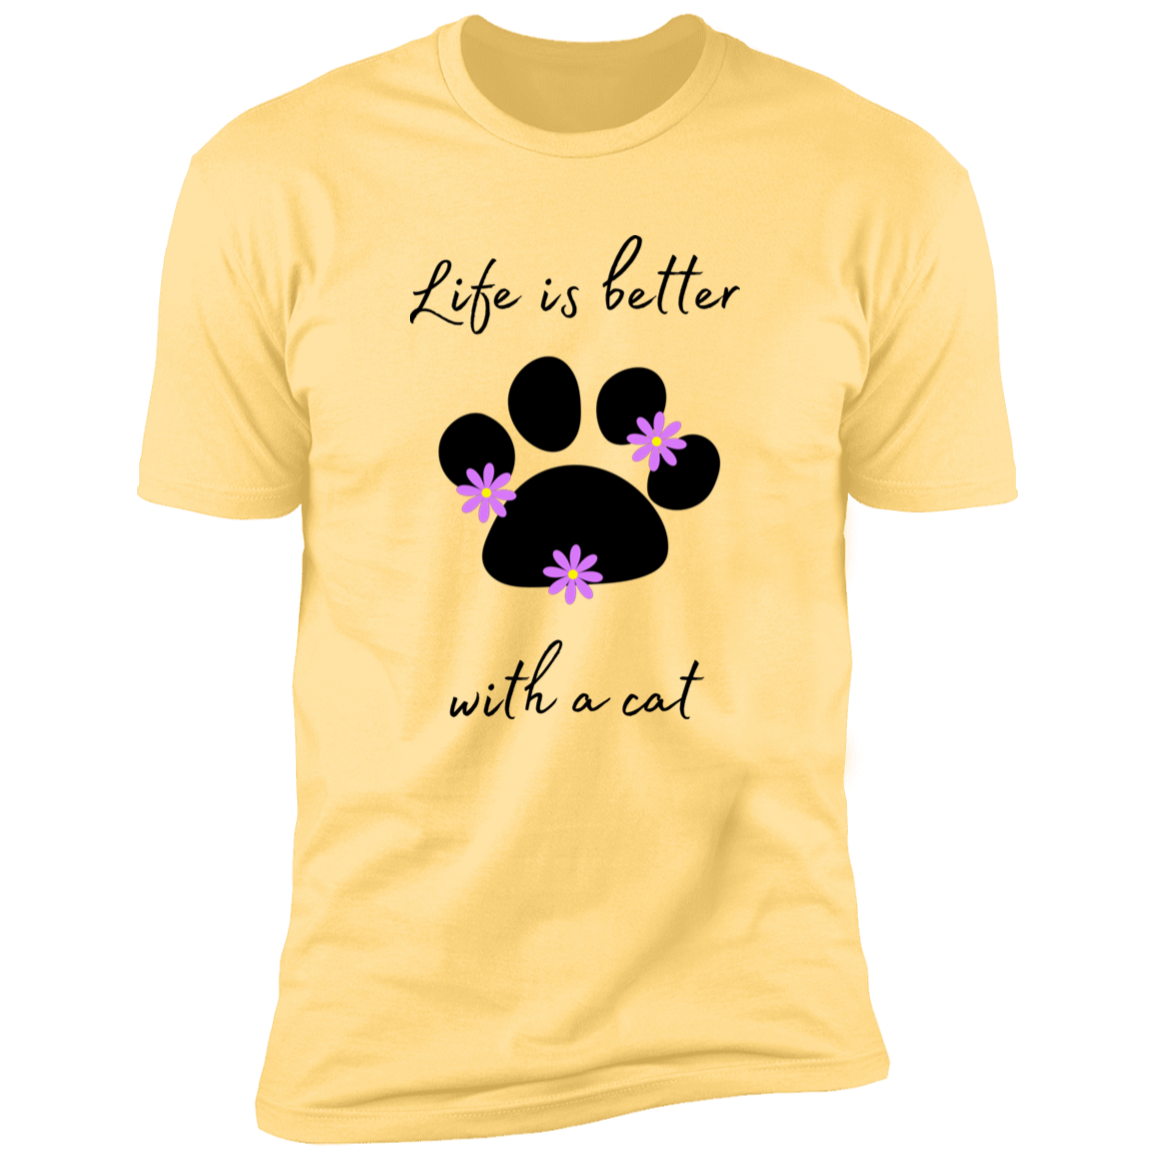 Life is Better with a Cat (Flower) cat t-shirt, cat shirt for humans, cat themed t-shirt, in banana cream